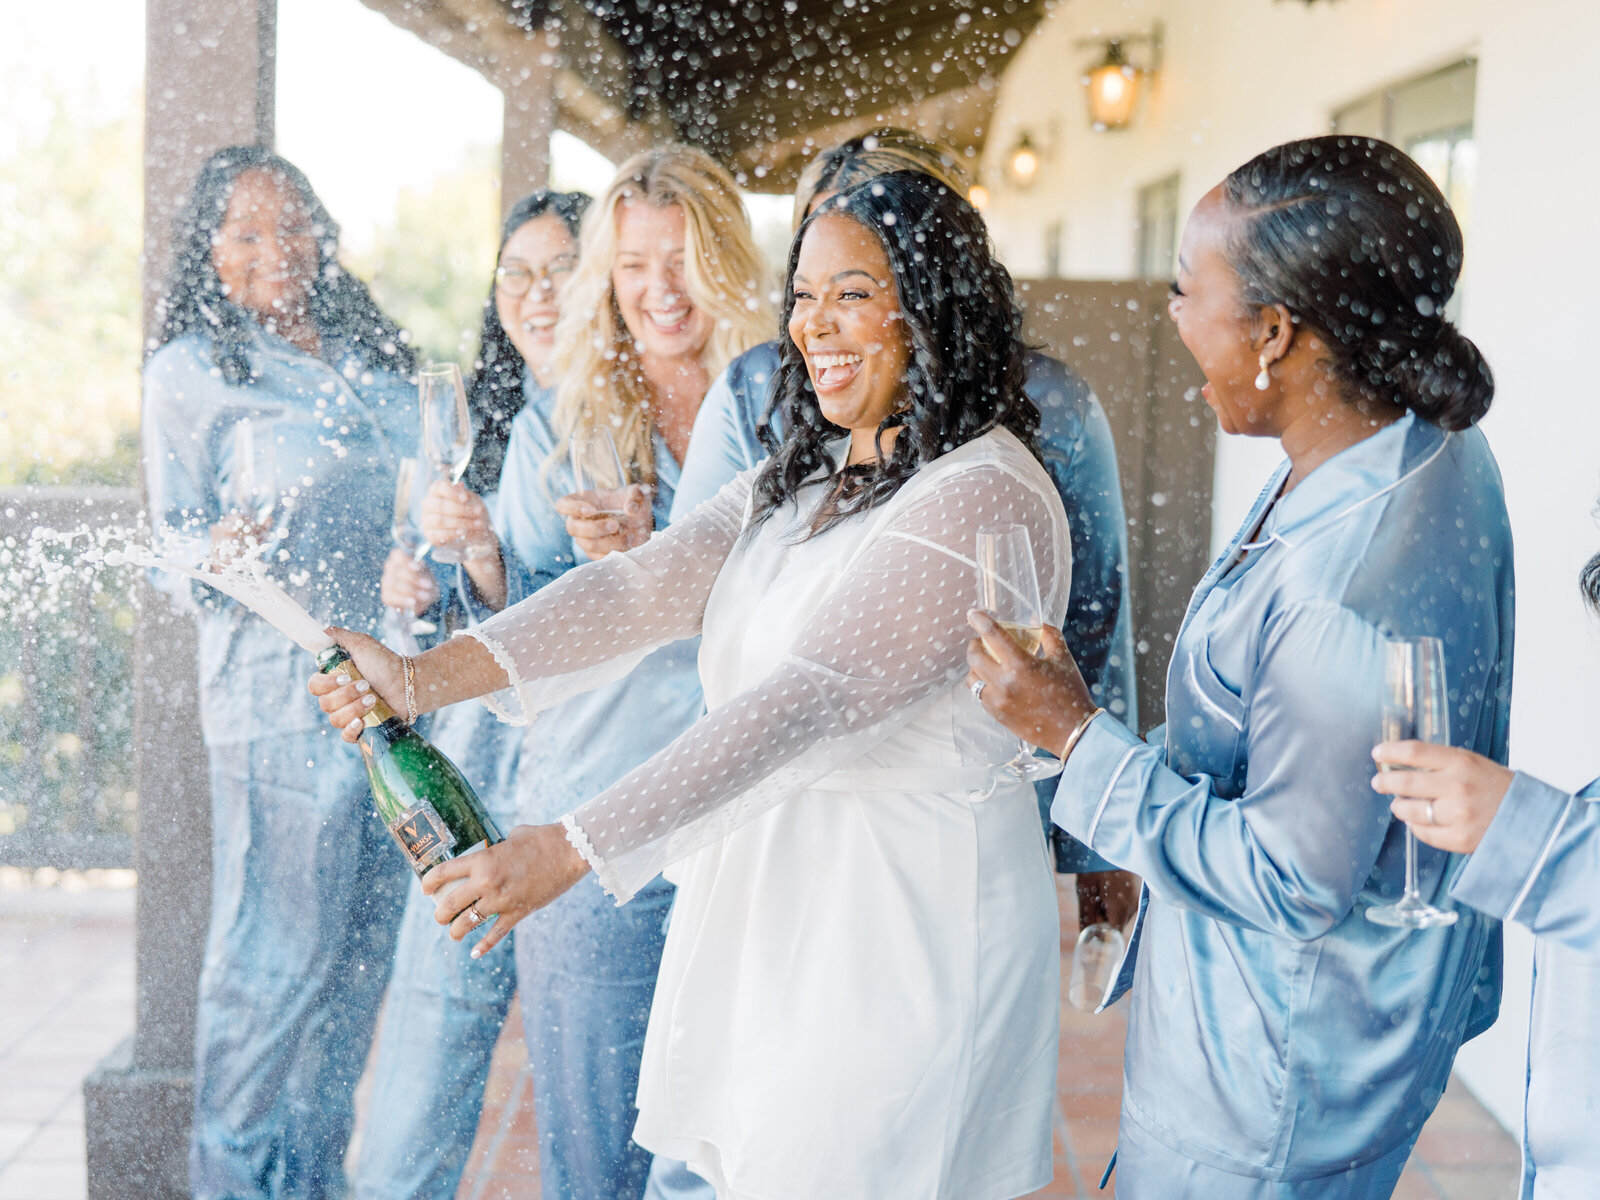 bride popping champagne to make a toast with her bridesmaids